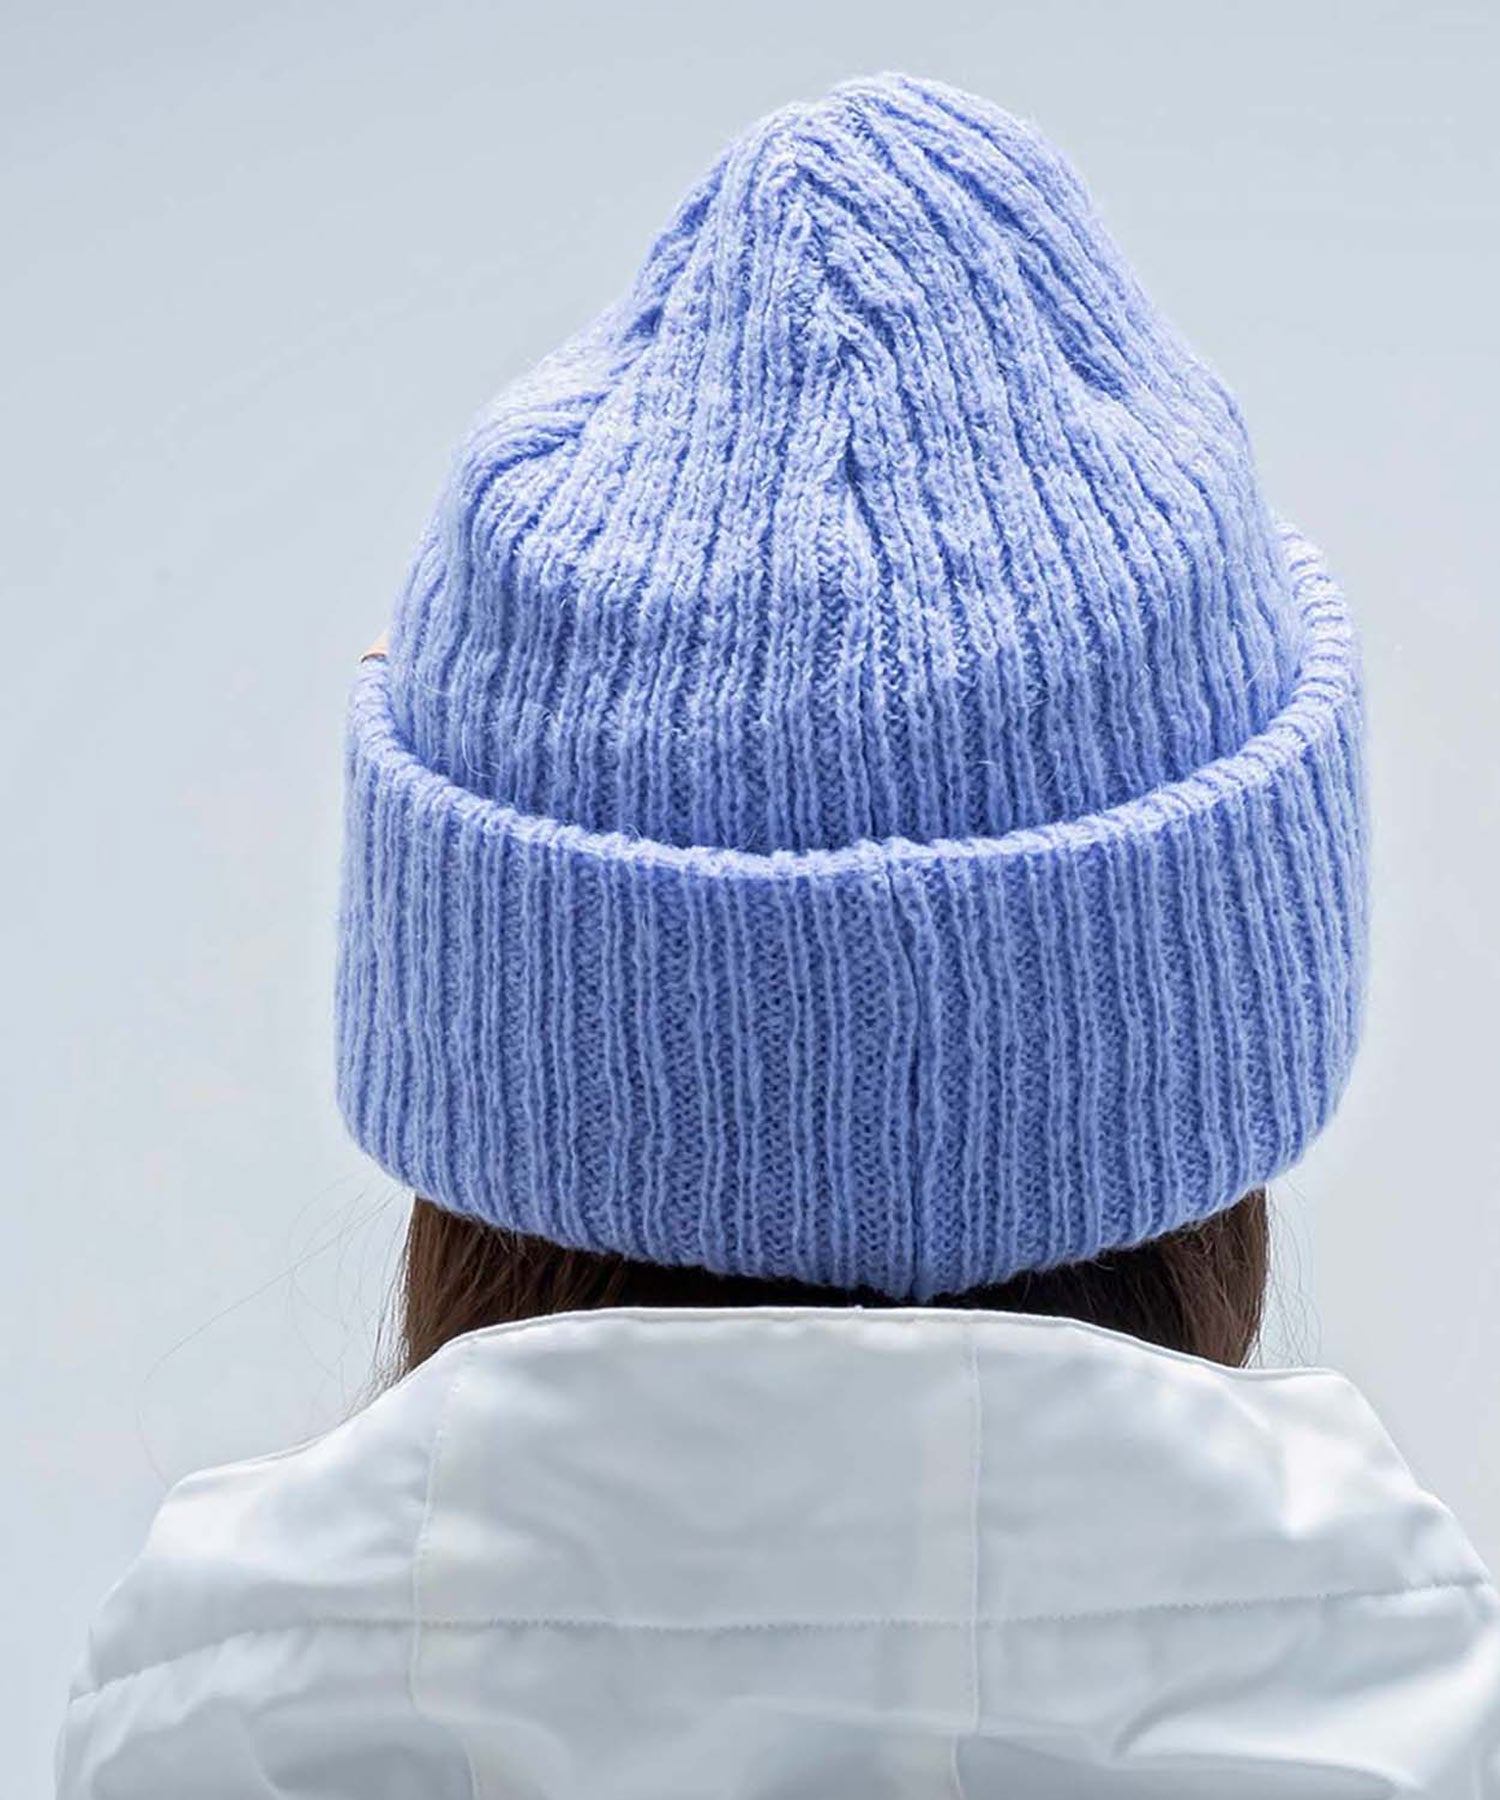 WOMENS】スキーウェア ニットキャップ Super Space-Time Knit Hat ...